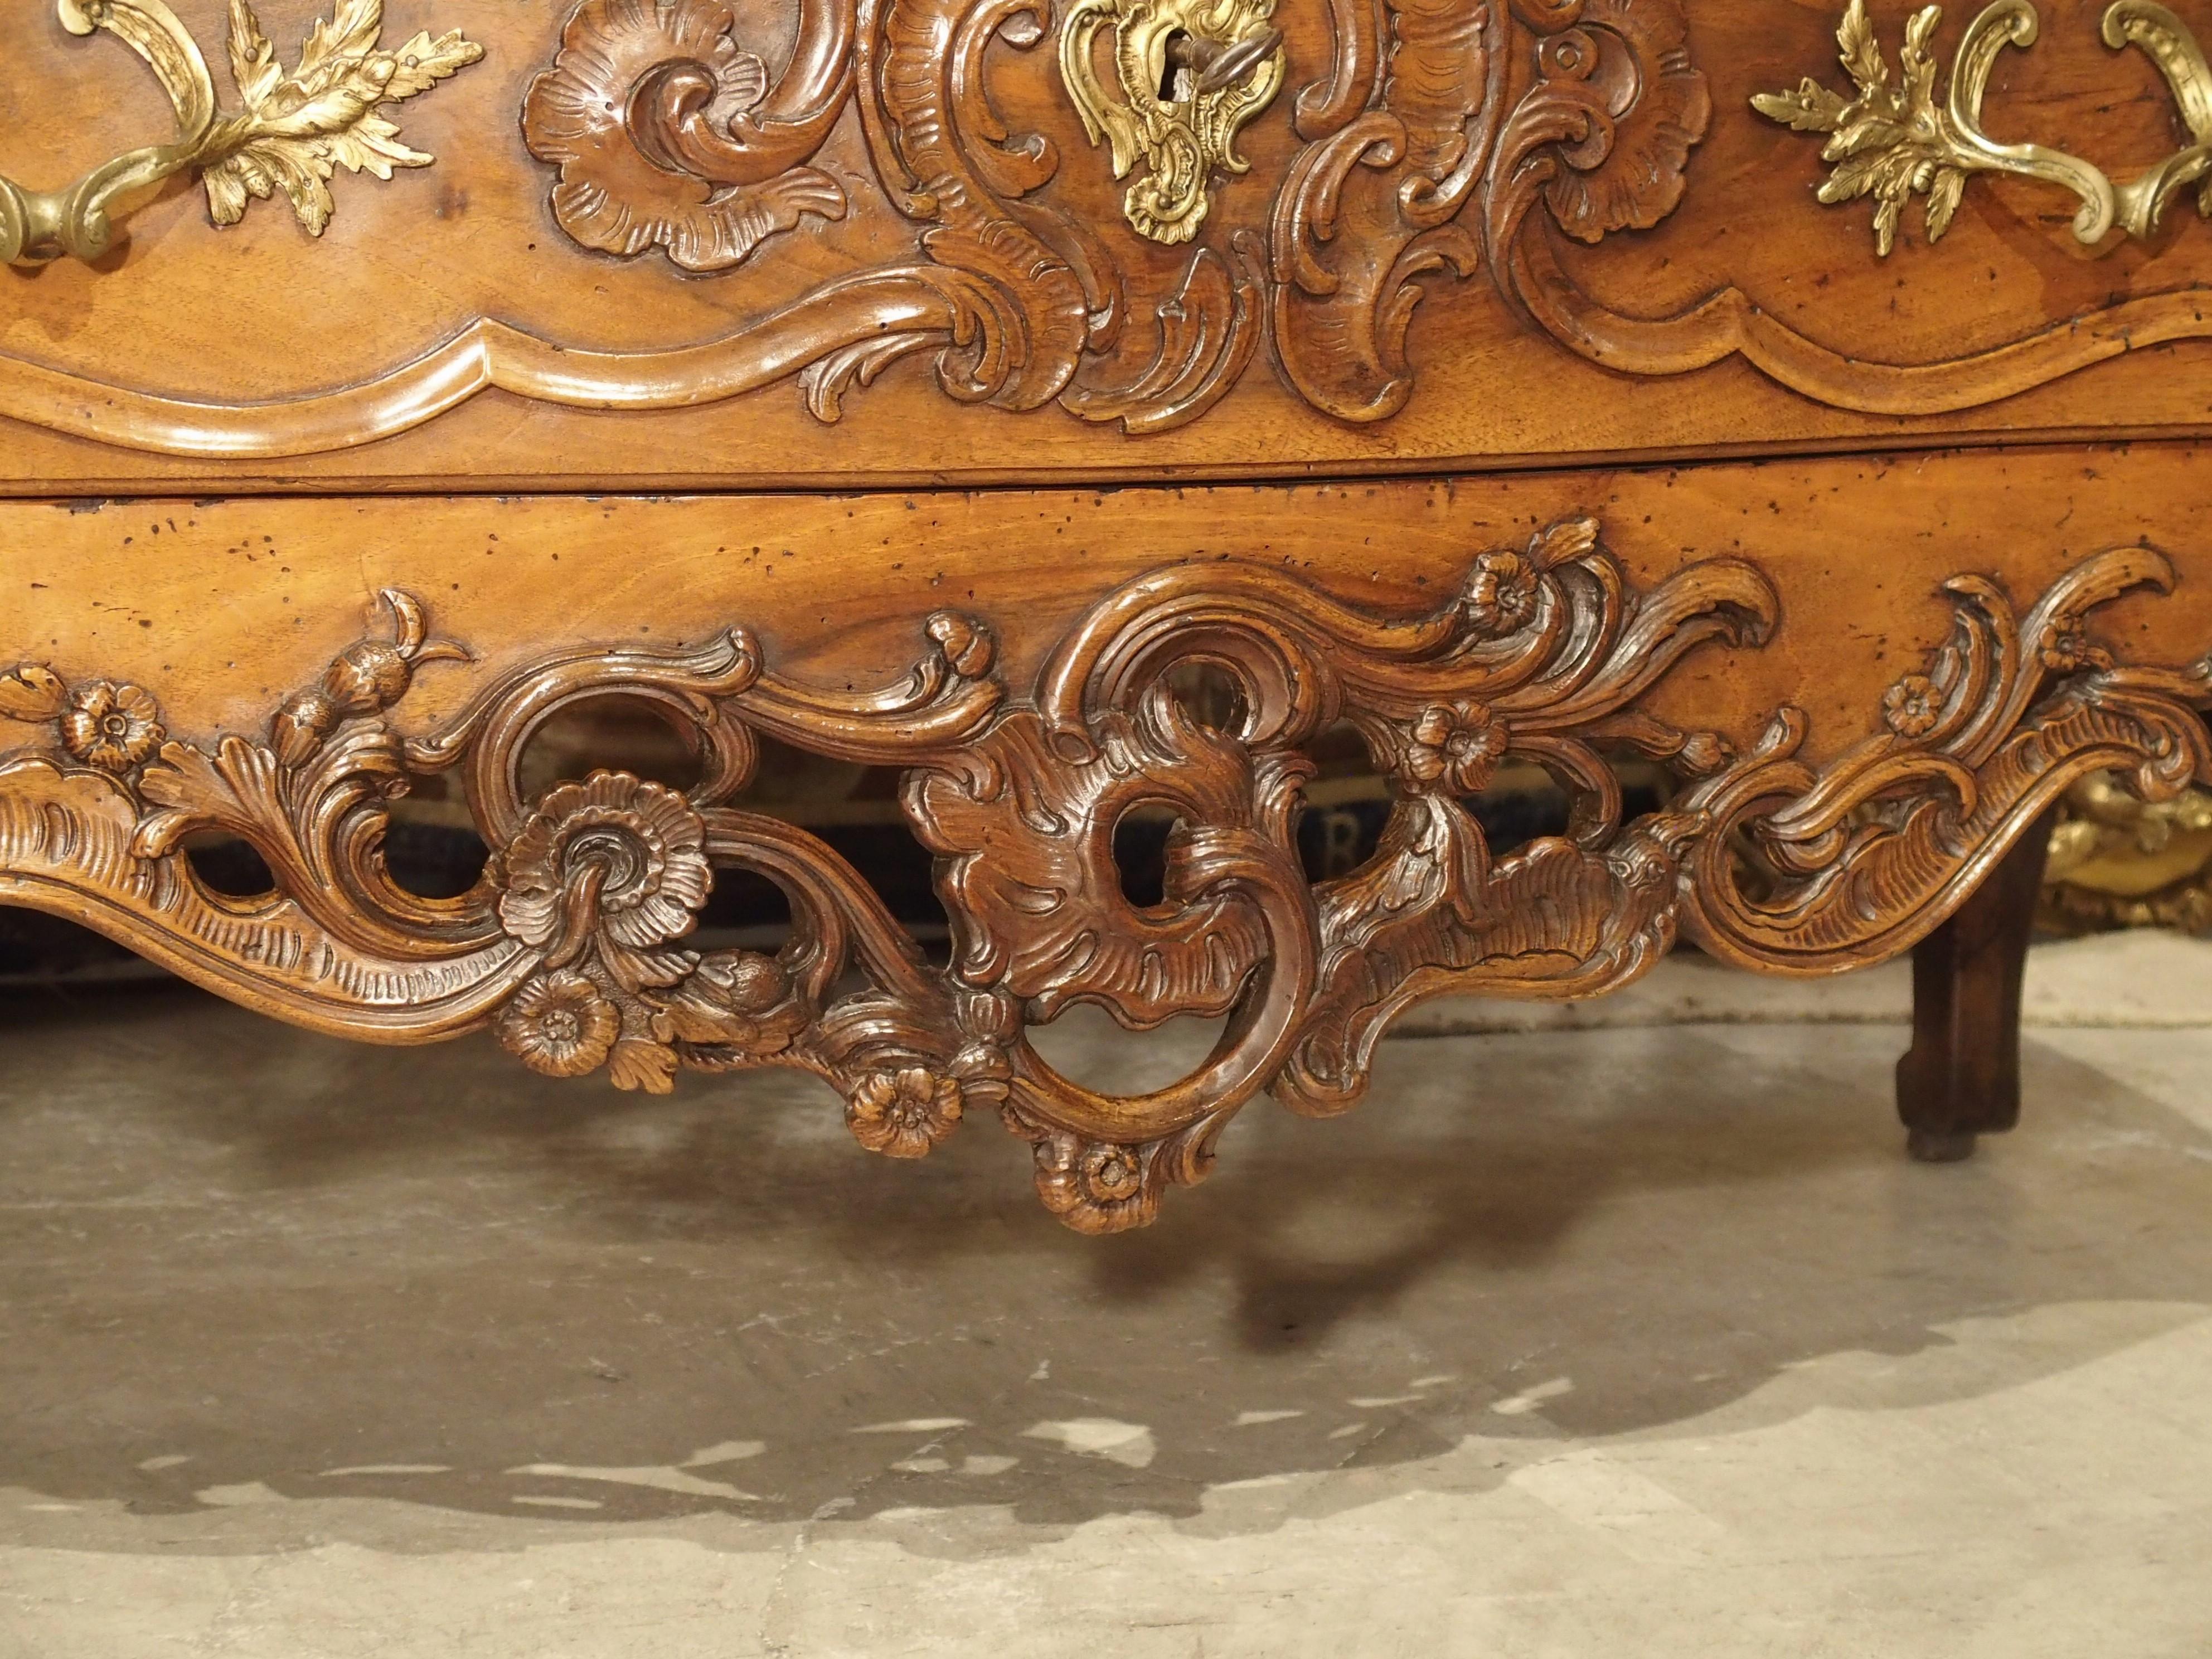 18th Century Period Louis XV Walnut Wood Commode ‘Sauteuse’ from Nimes, France, circa 1740